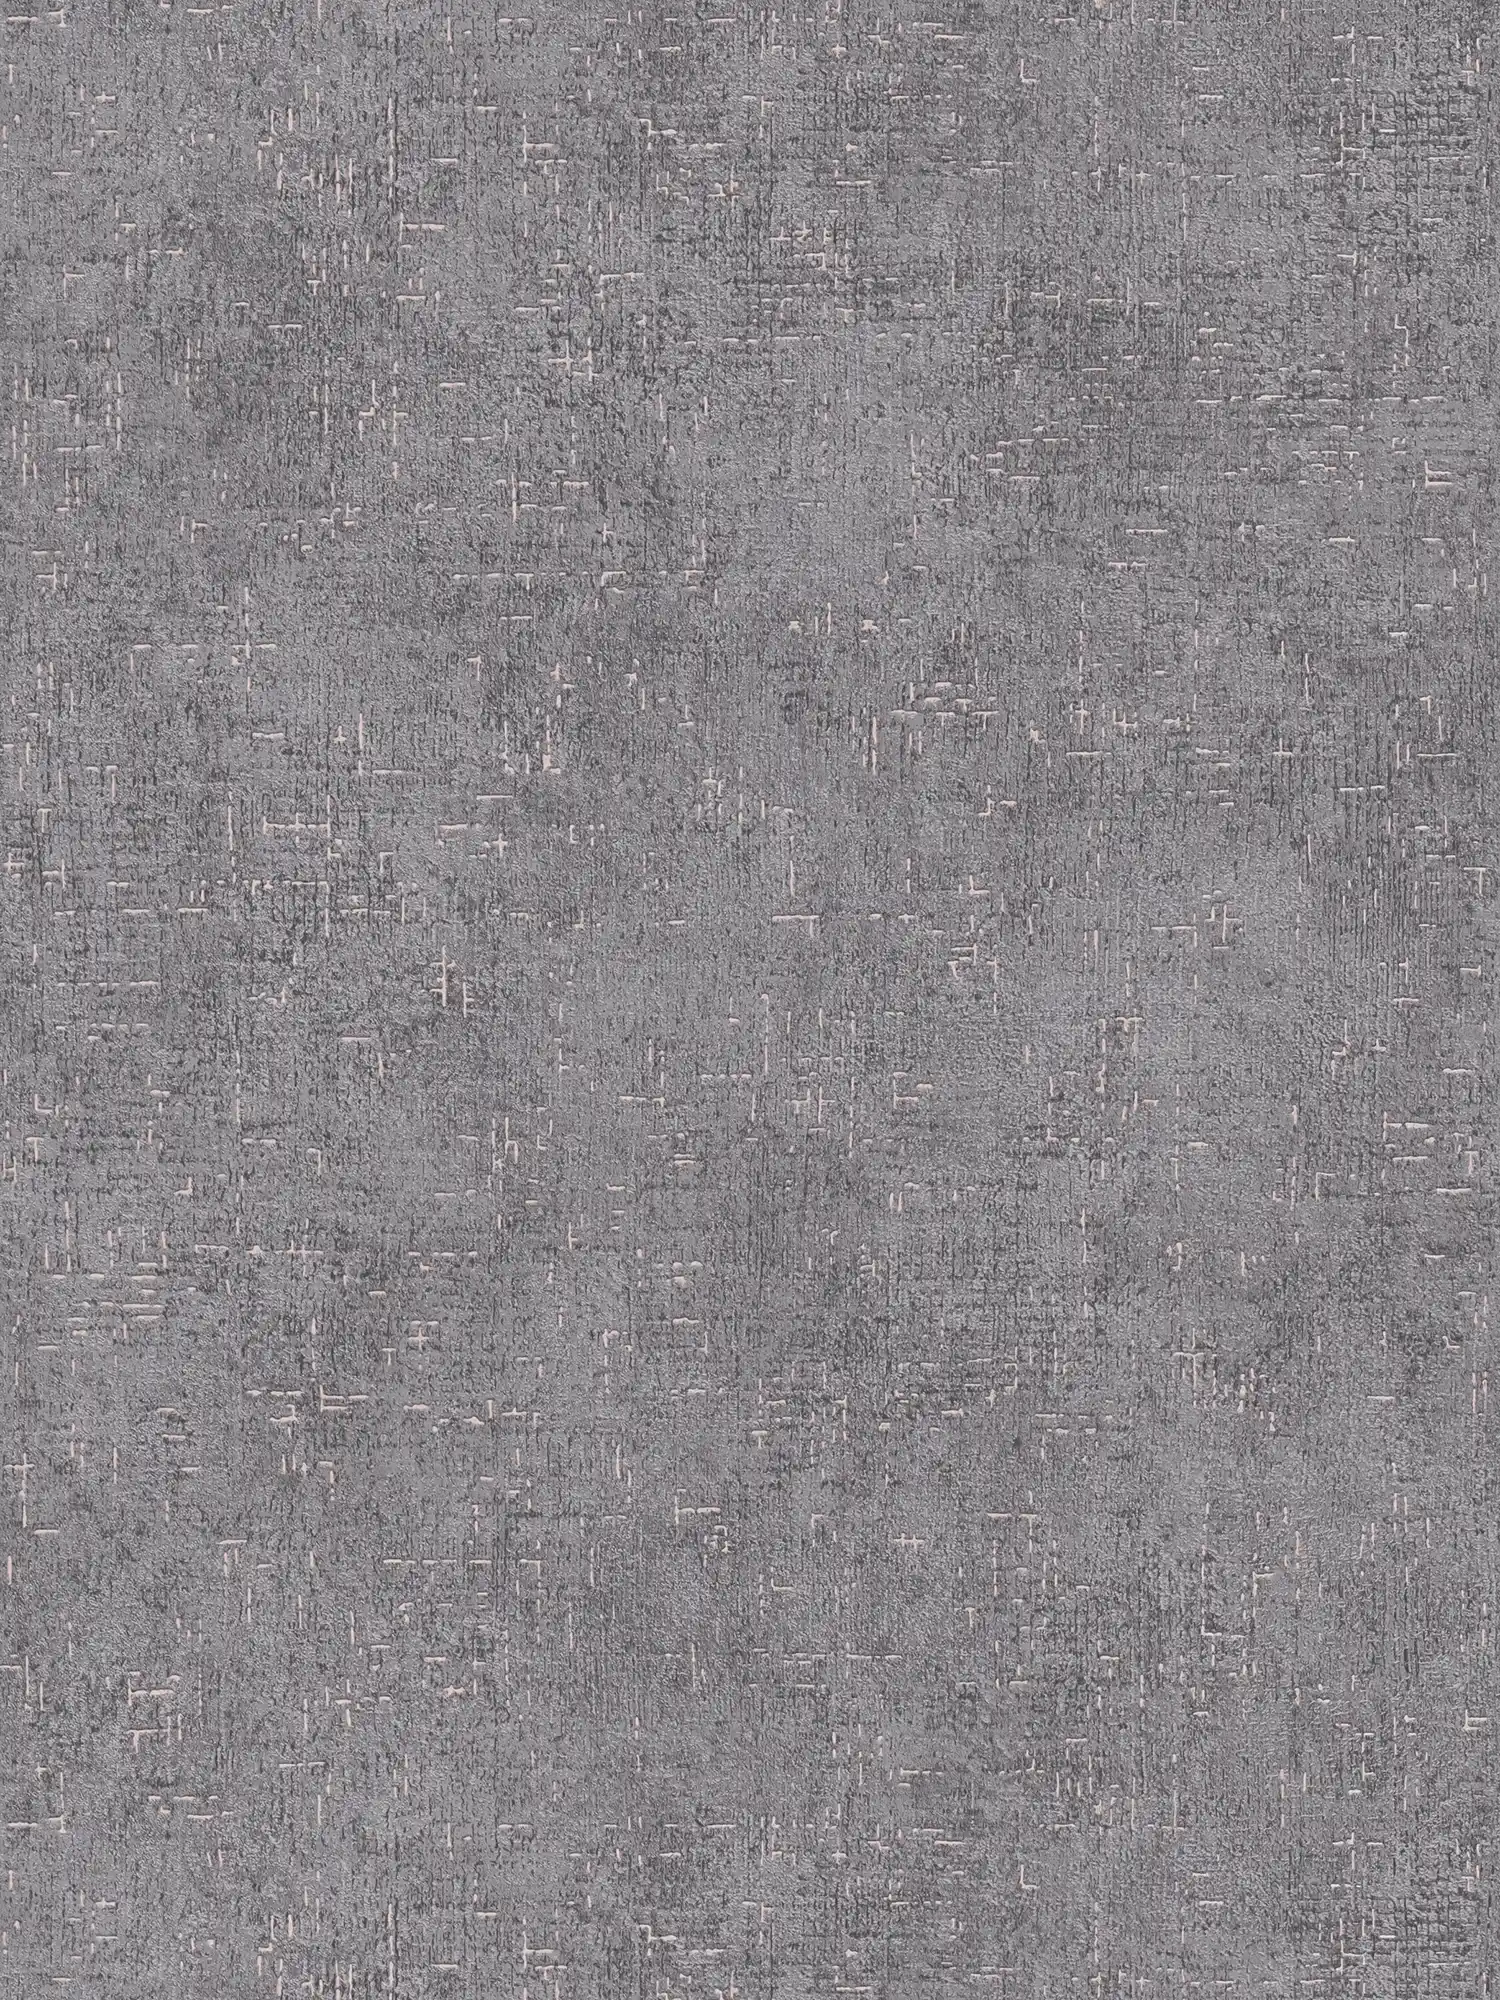         Wallpaper grey & gold with rustic texture design
    